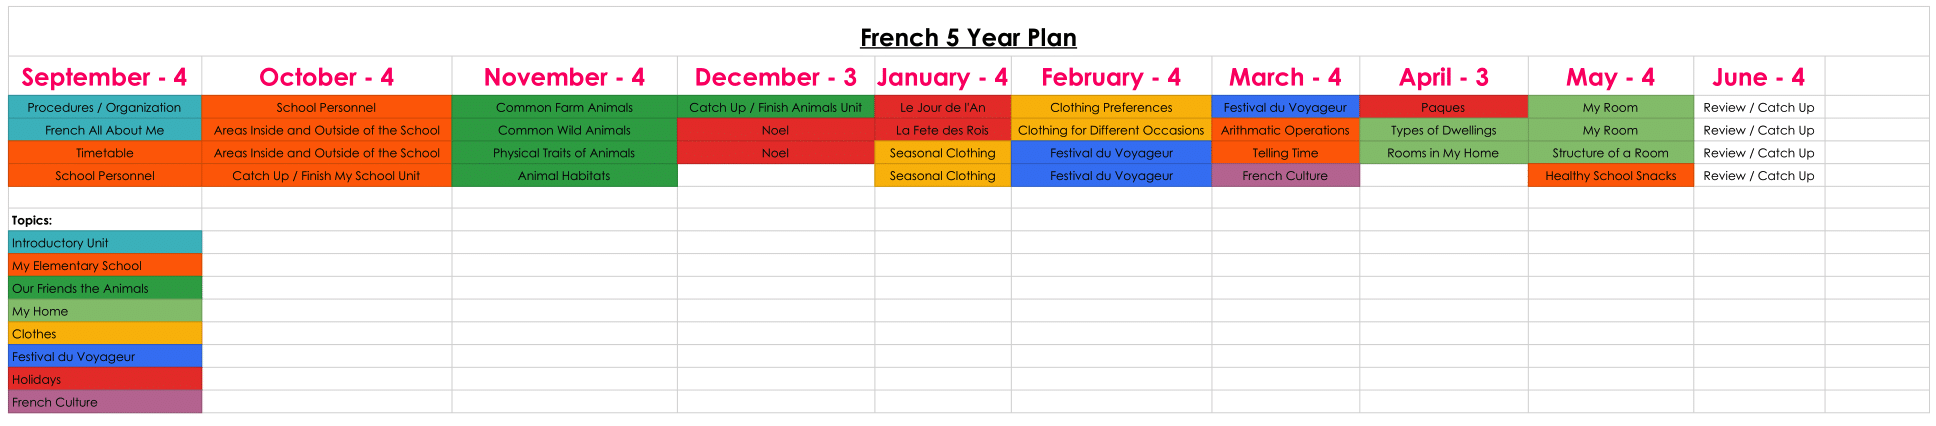 alberta fsl 5 year plan for french as a second language